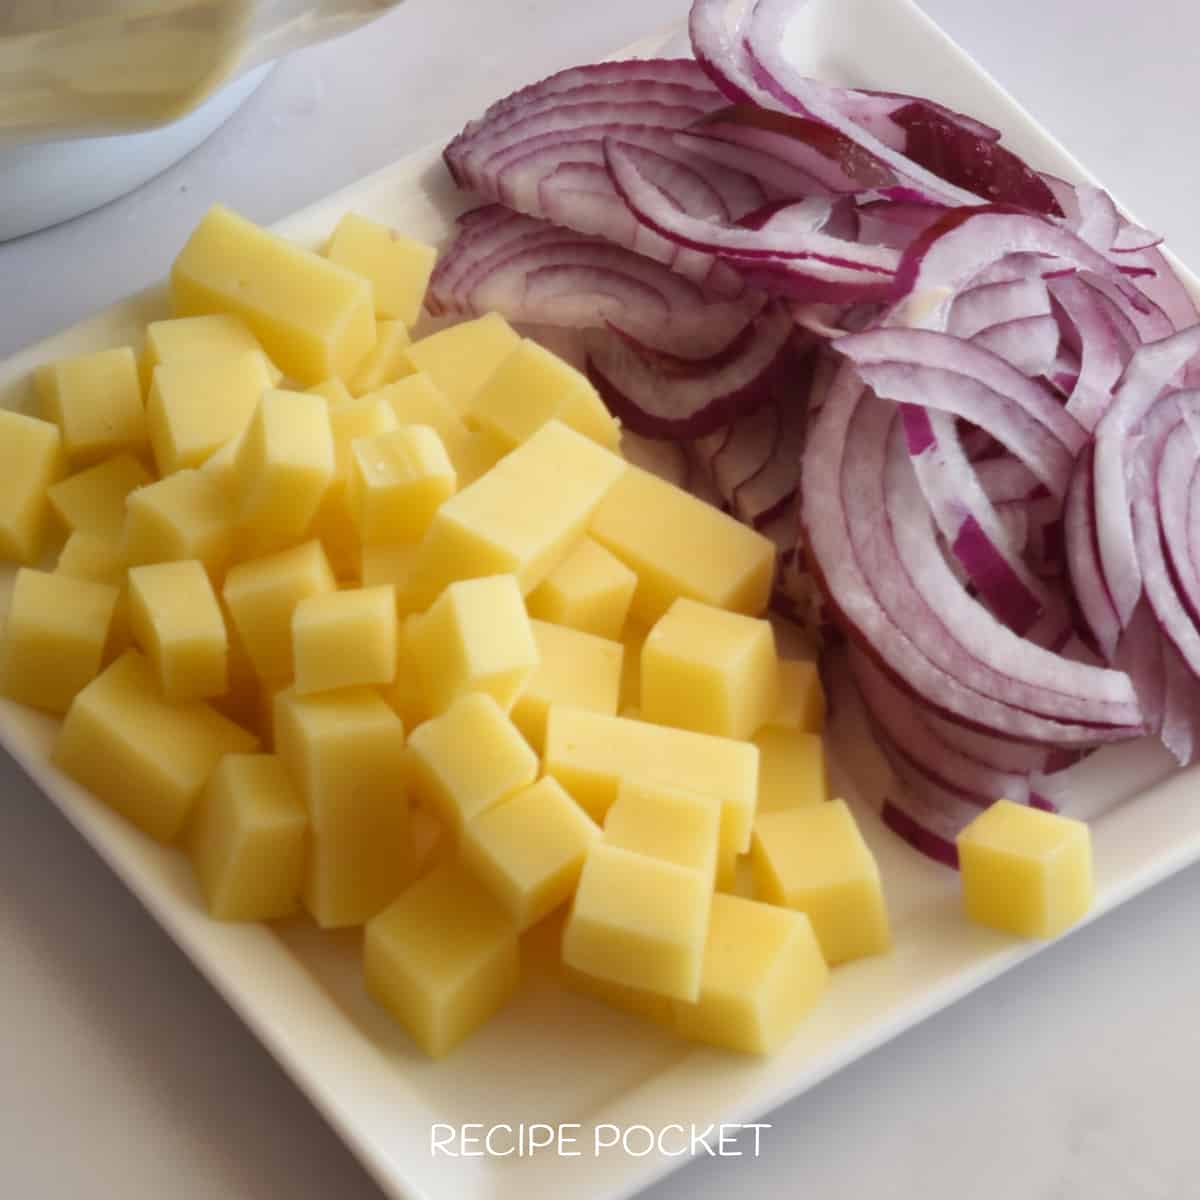 Cubed cheese and slices of red onion.